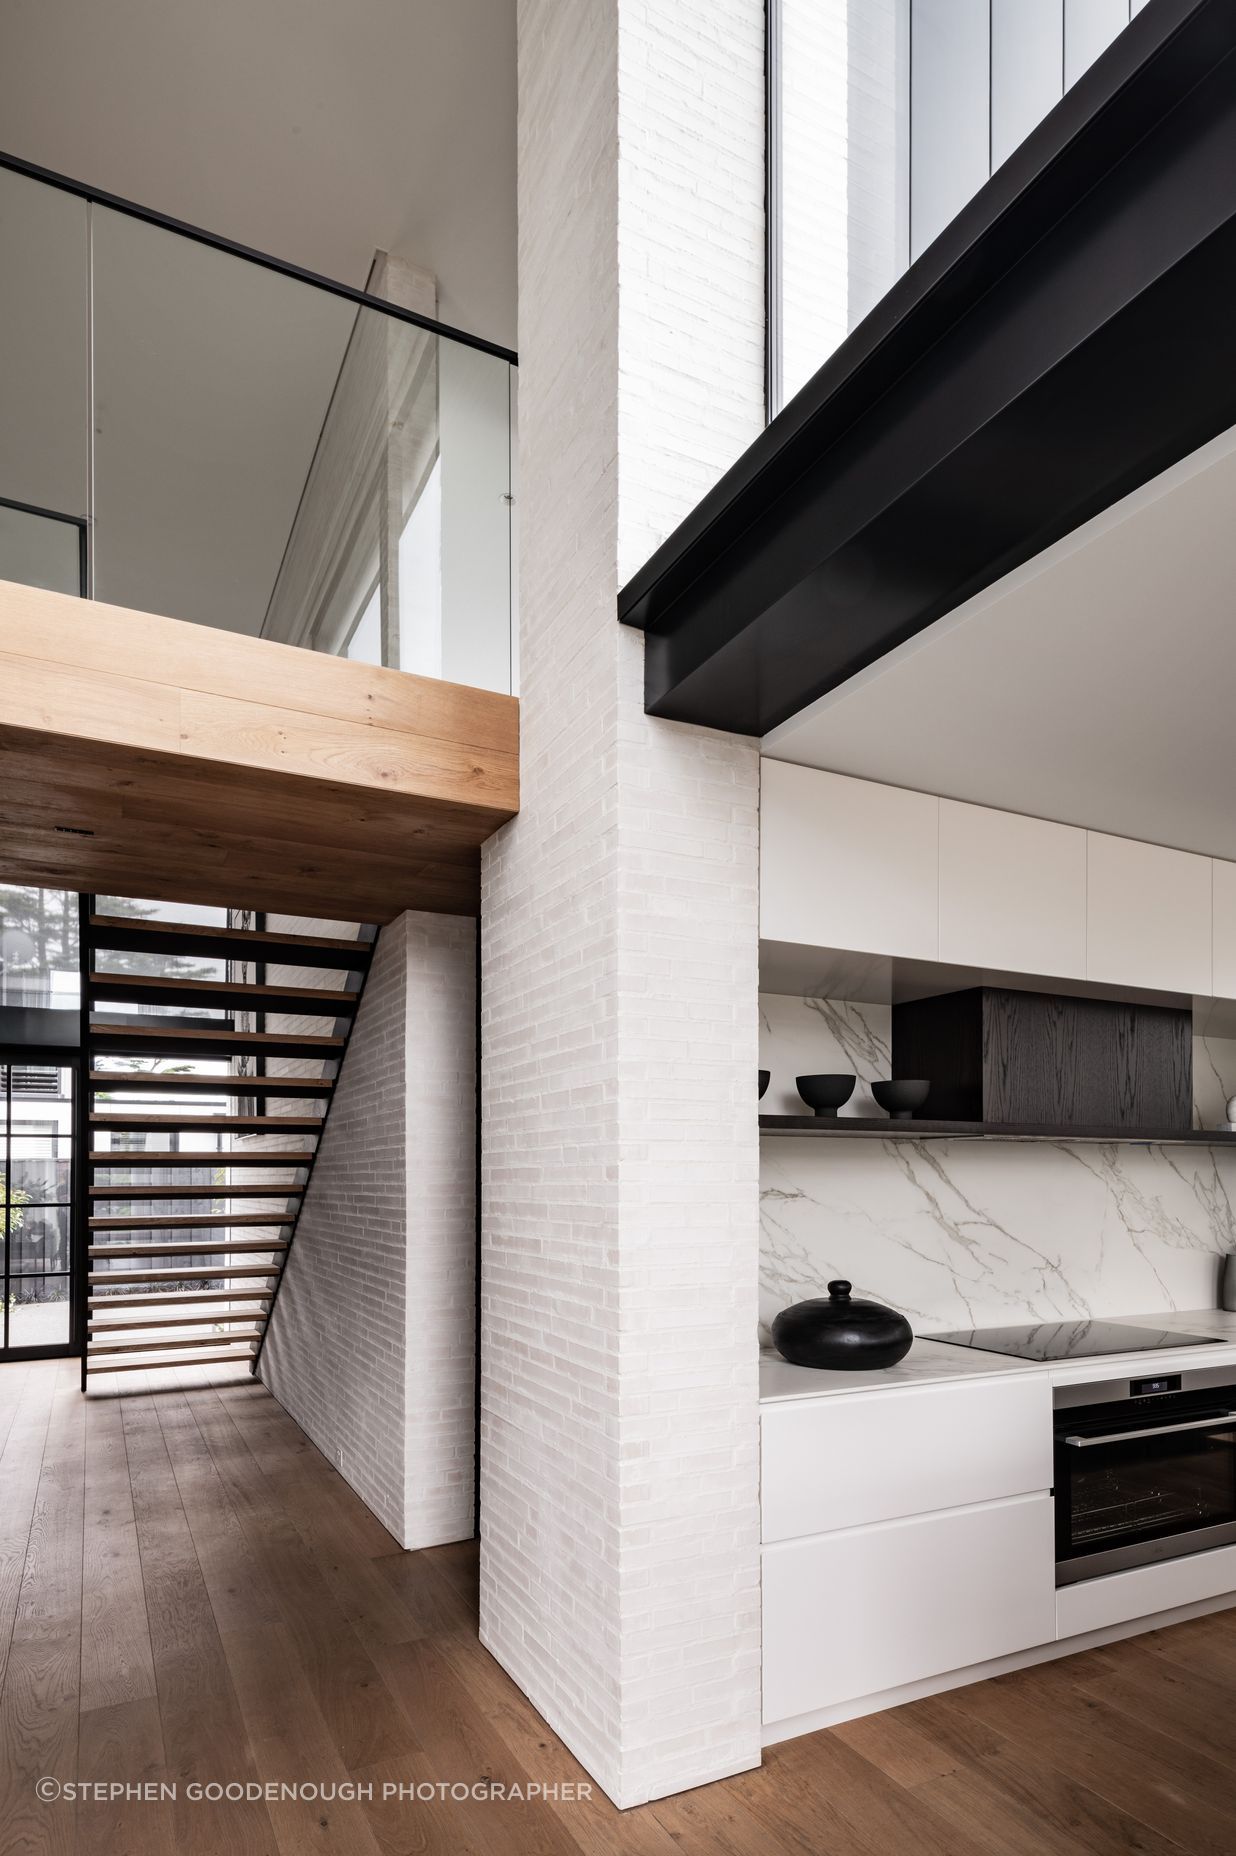 The bridge at the top of the stairs leads to two bedroom suites, and a powder room is tucked underneath. Glazing over the kitchen brings light into the double height living room.